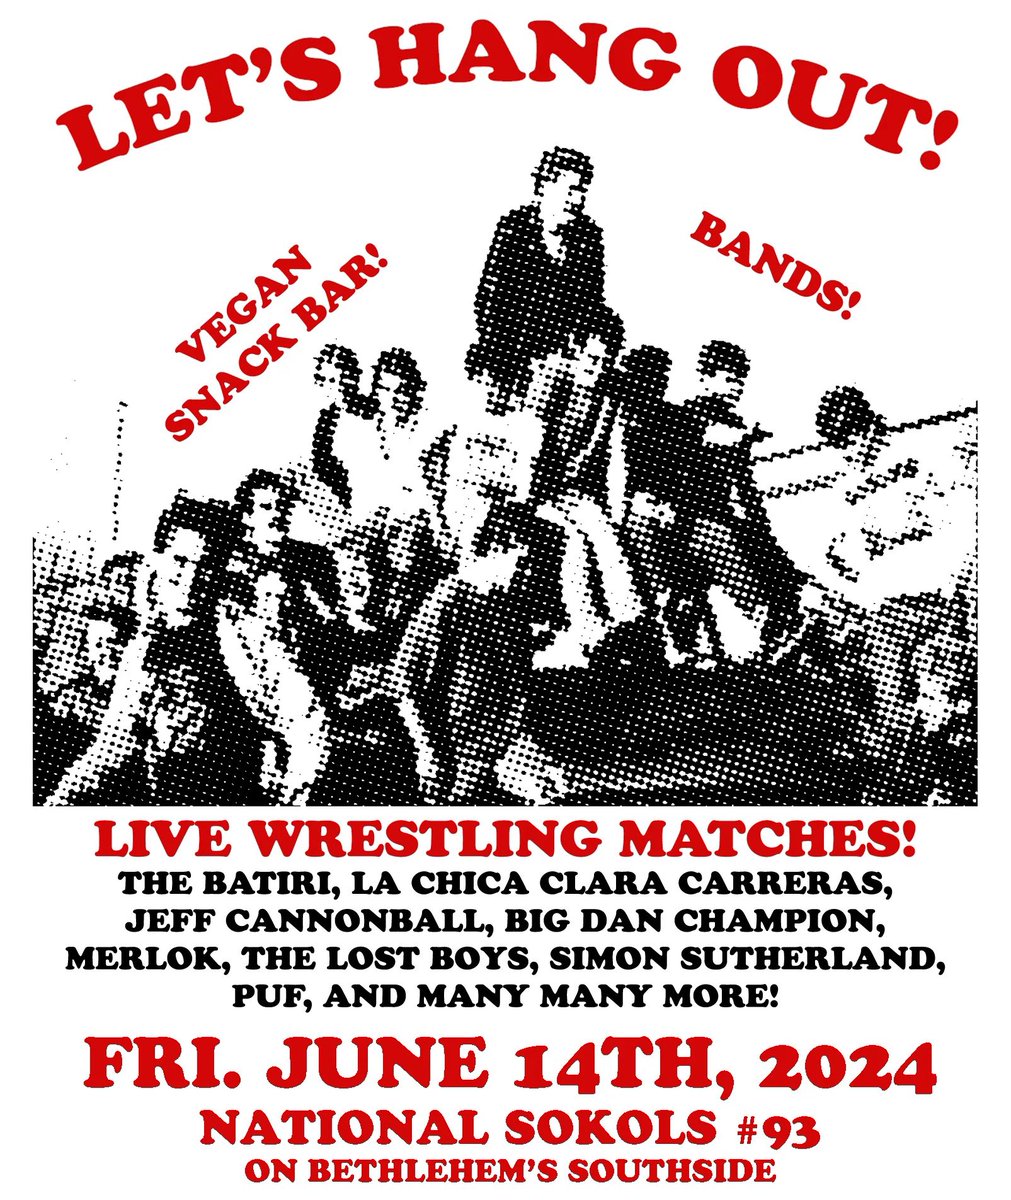 Just about one month away from our return to Sokols - LET’S HANG OUT on June 14th! Tickets on sale NOW @ merchbin.net and you know they always sell out!